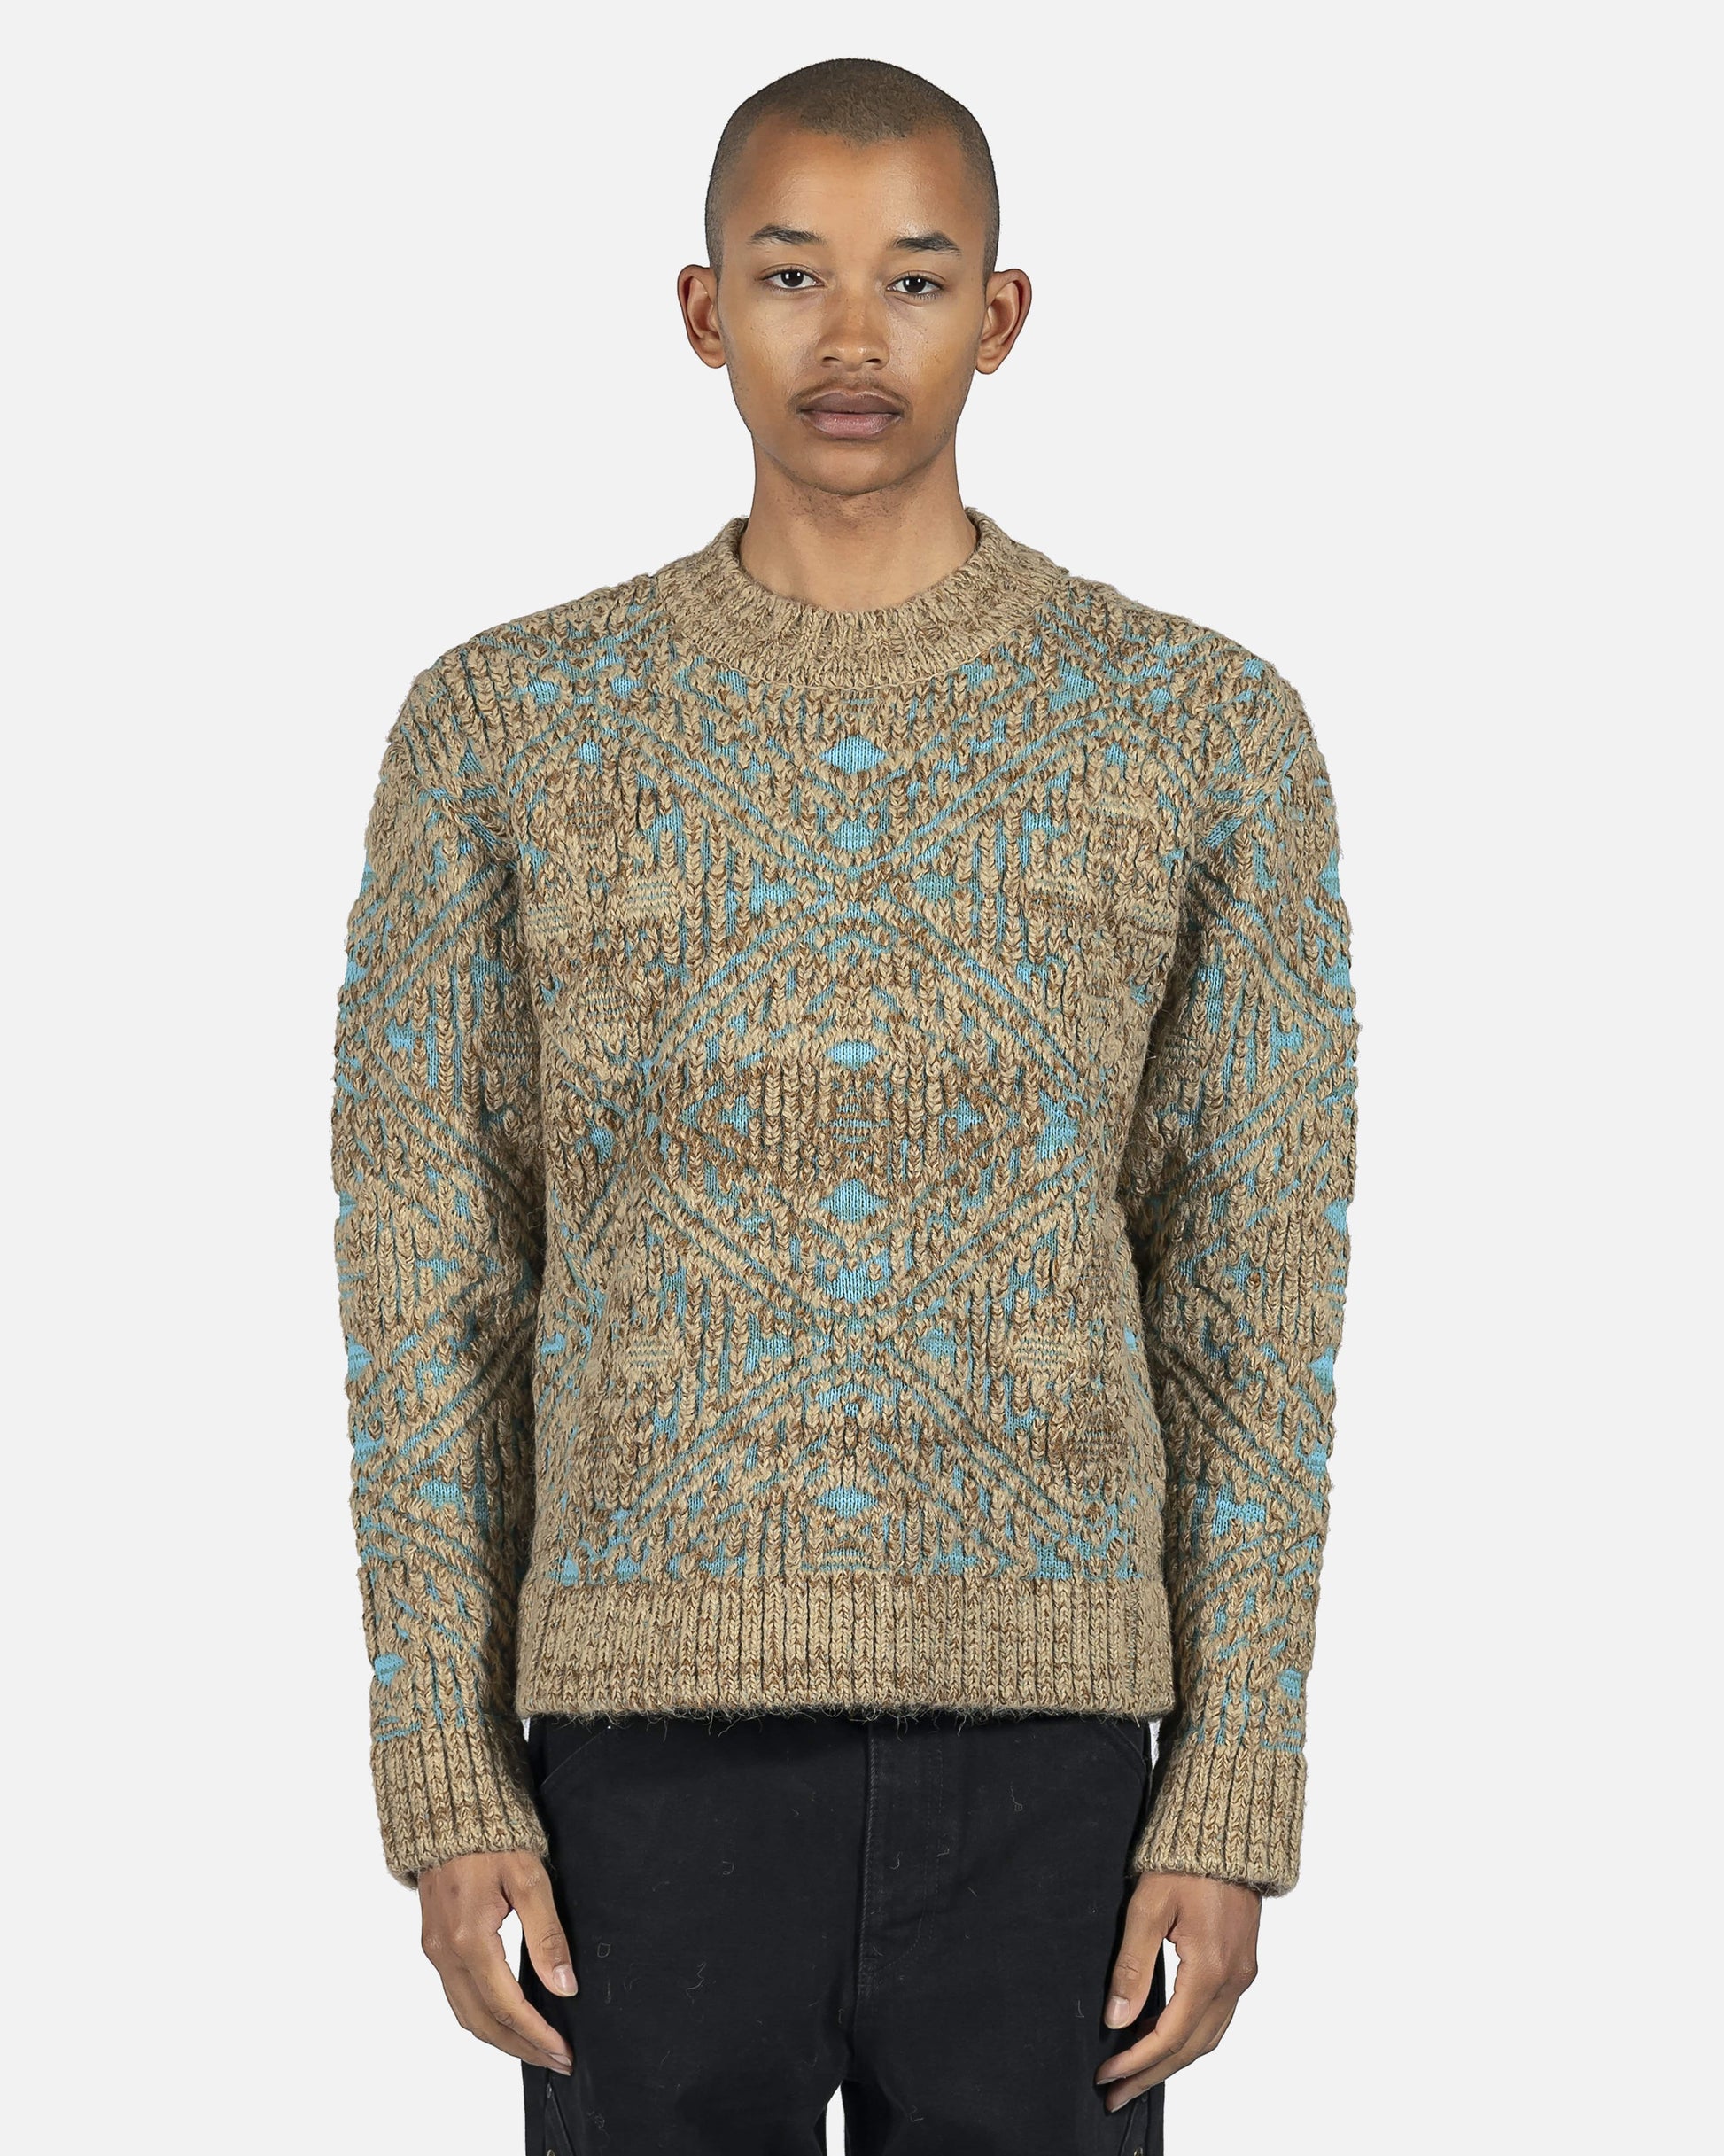 Andersson Bell mens sweater Jacquard Heavy Crewneck Sweater in Blue/Beige